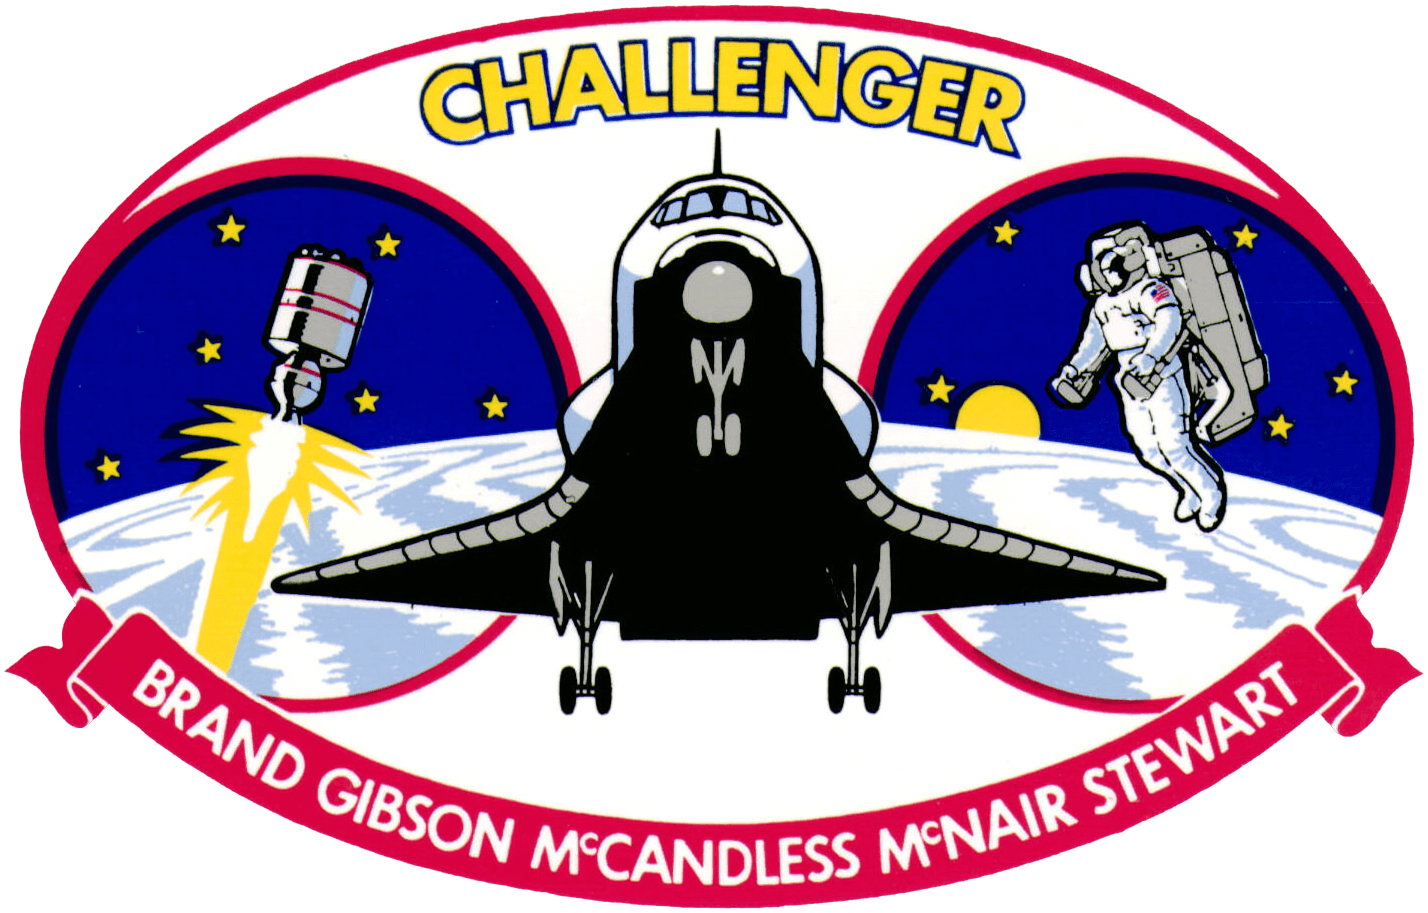 Mission patch for STS-41-B